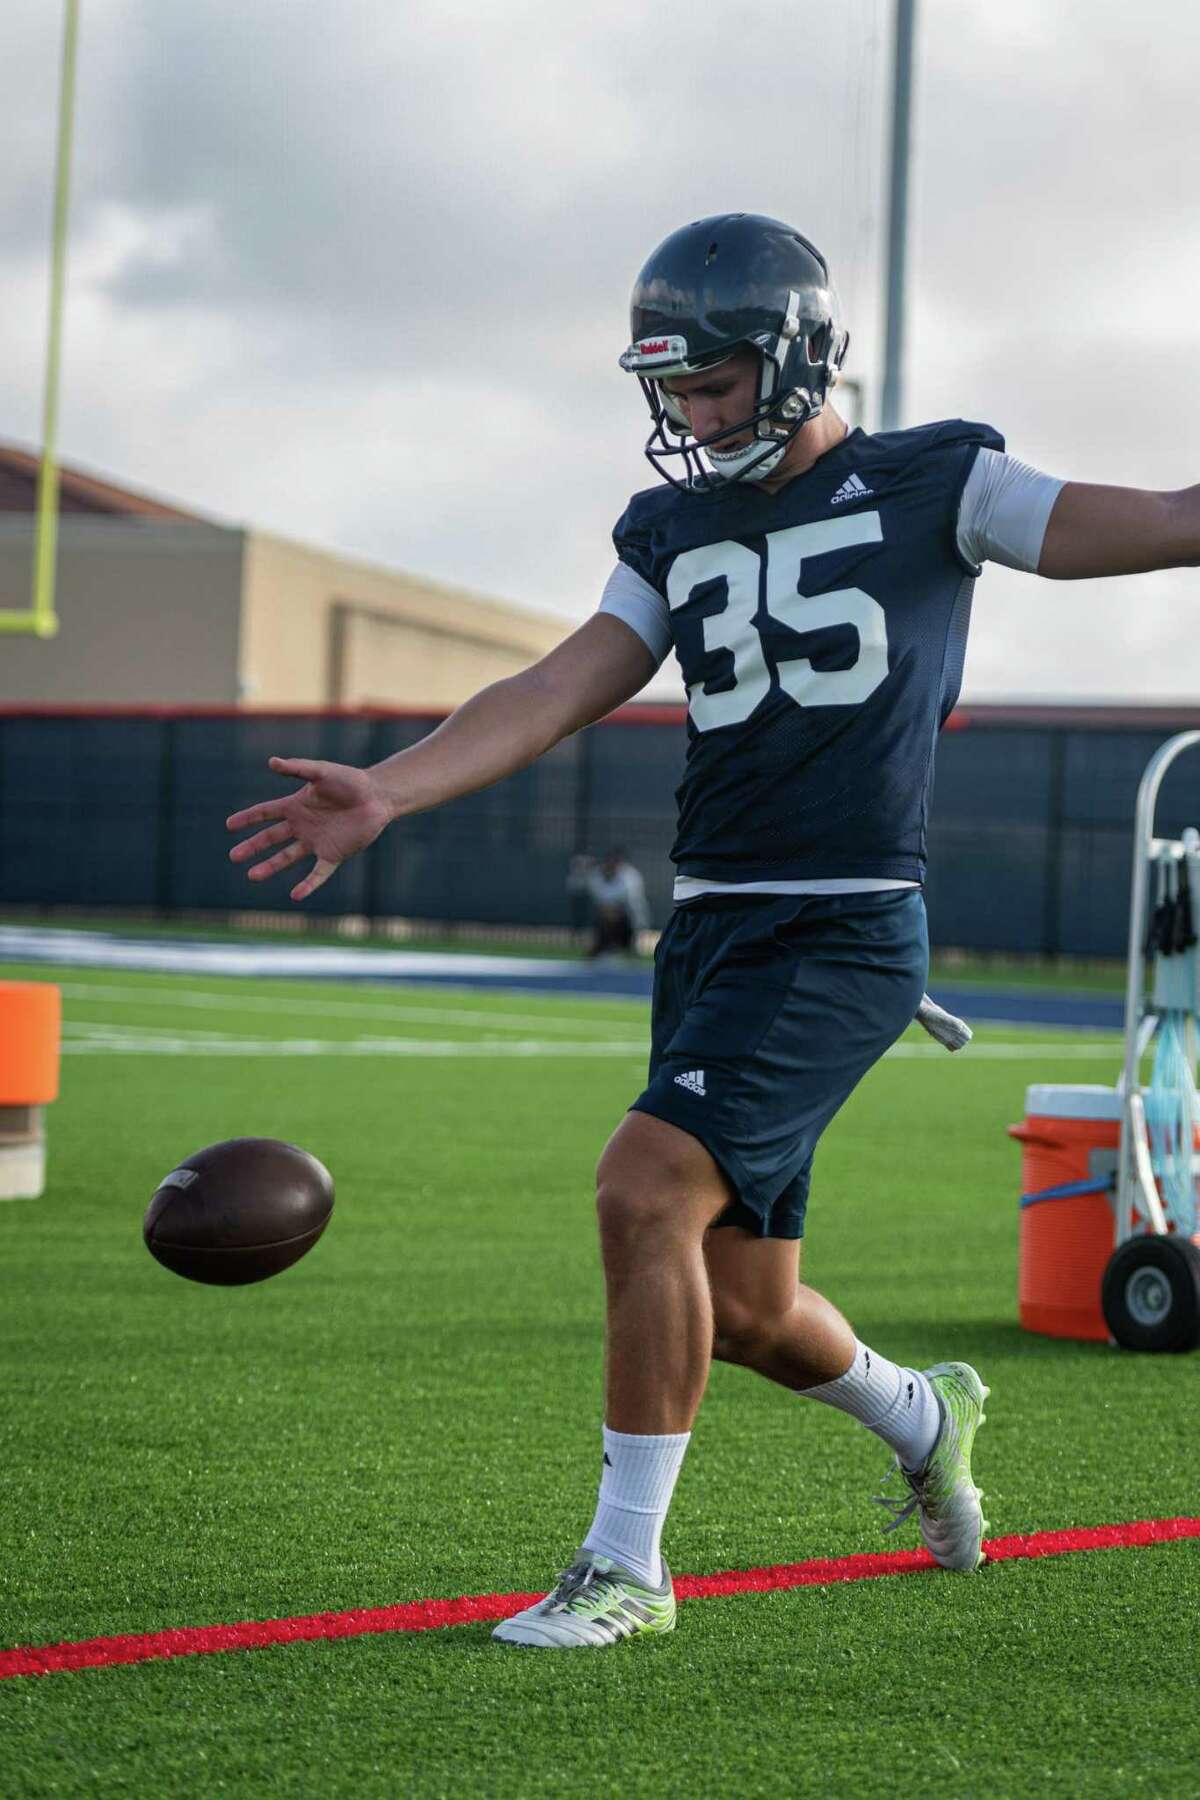 On Saturday morning of August 7th, 2021, UTSA's football team holds practice on the field by the new Roadrunner Athletic Center of Excellence (RACE) in San Antonio, Texas. Here, Punter Lucas Dean practices kicks.